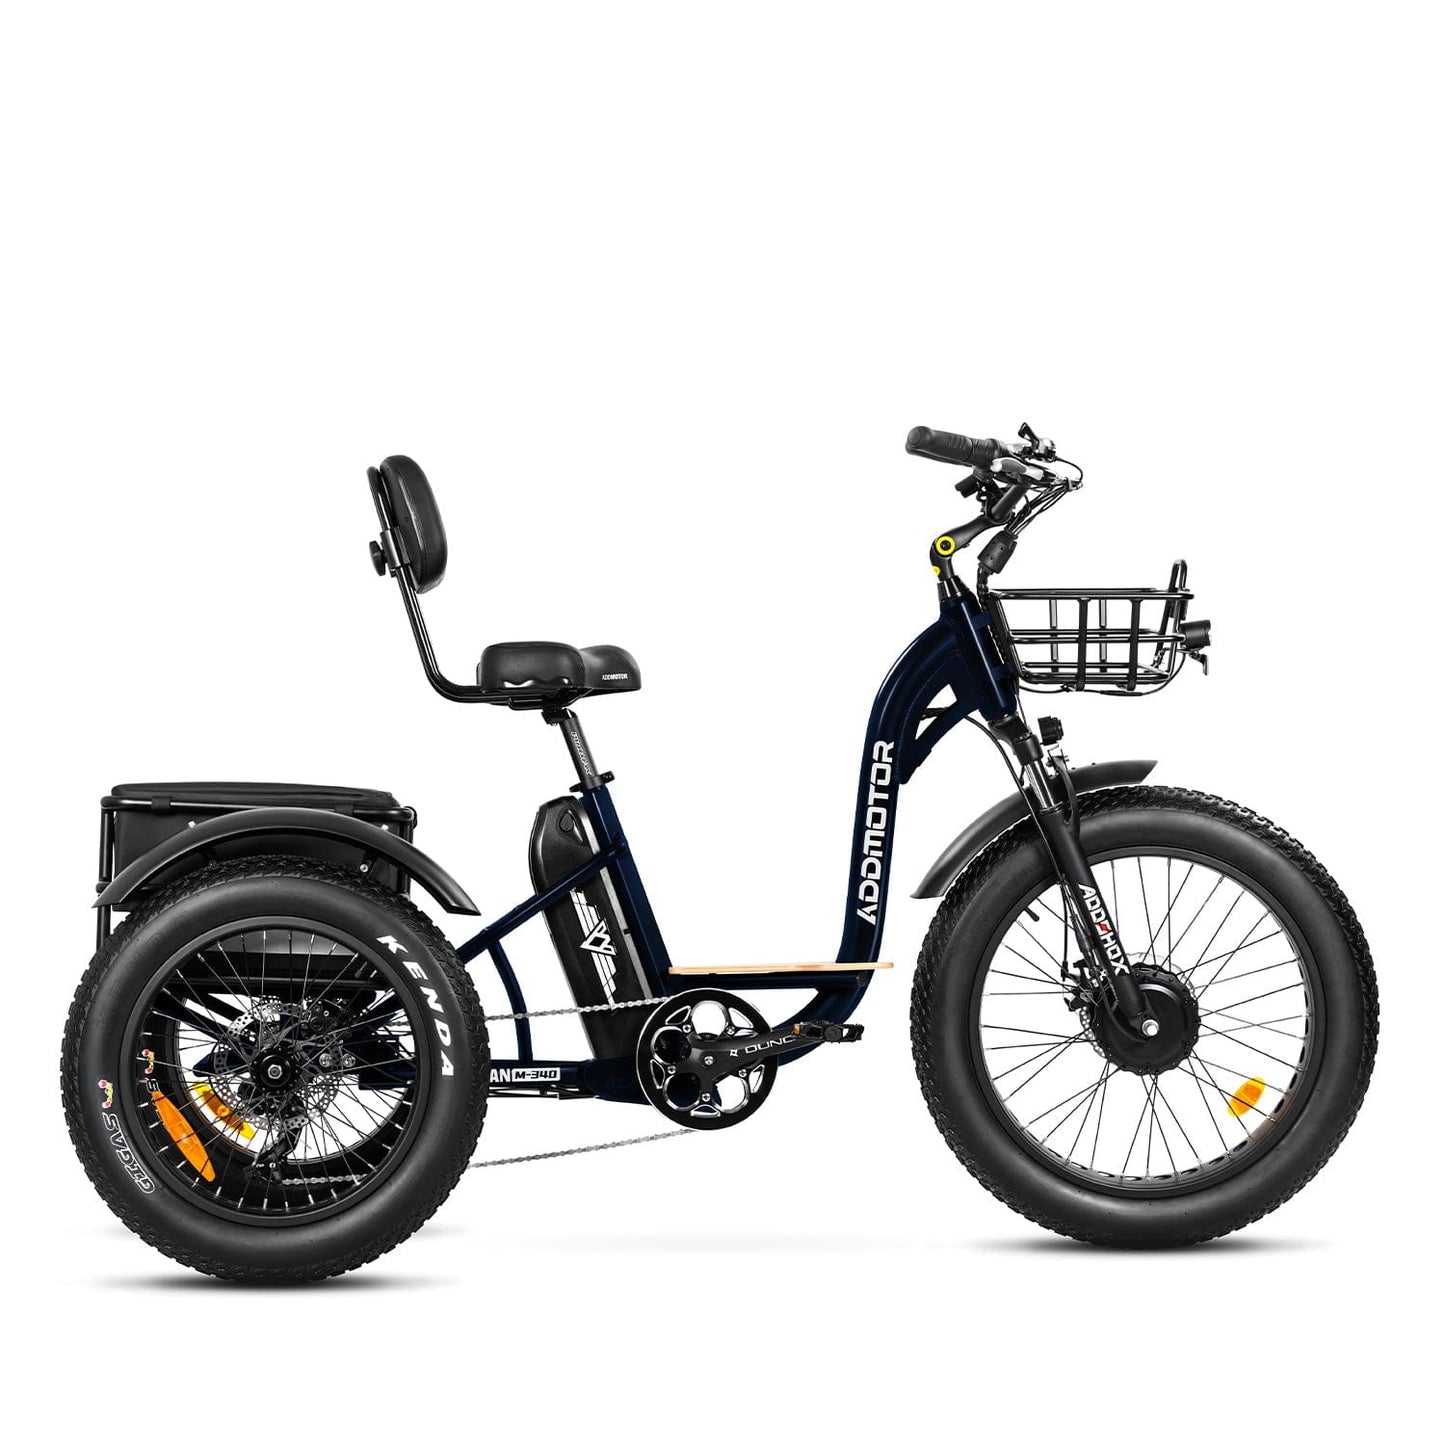 Grandtan M-340 Electric Tricycle | $262 FREE GIFTS